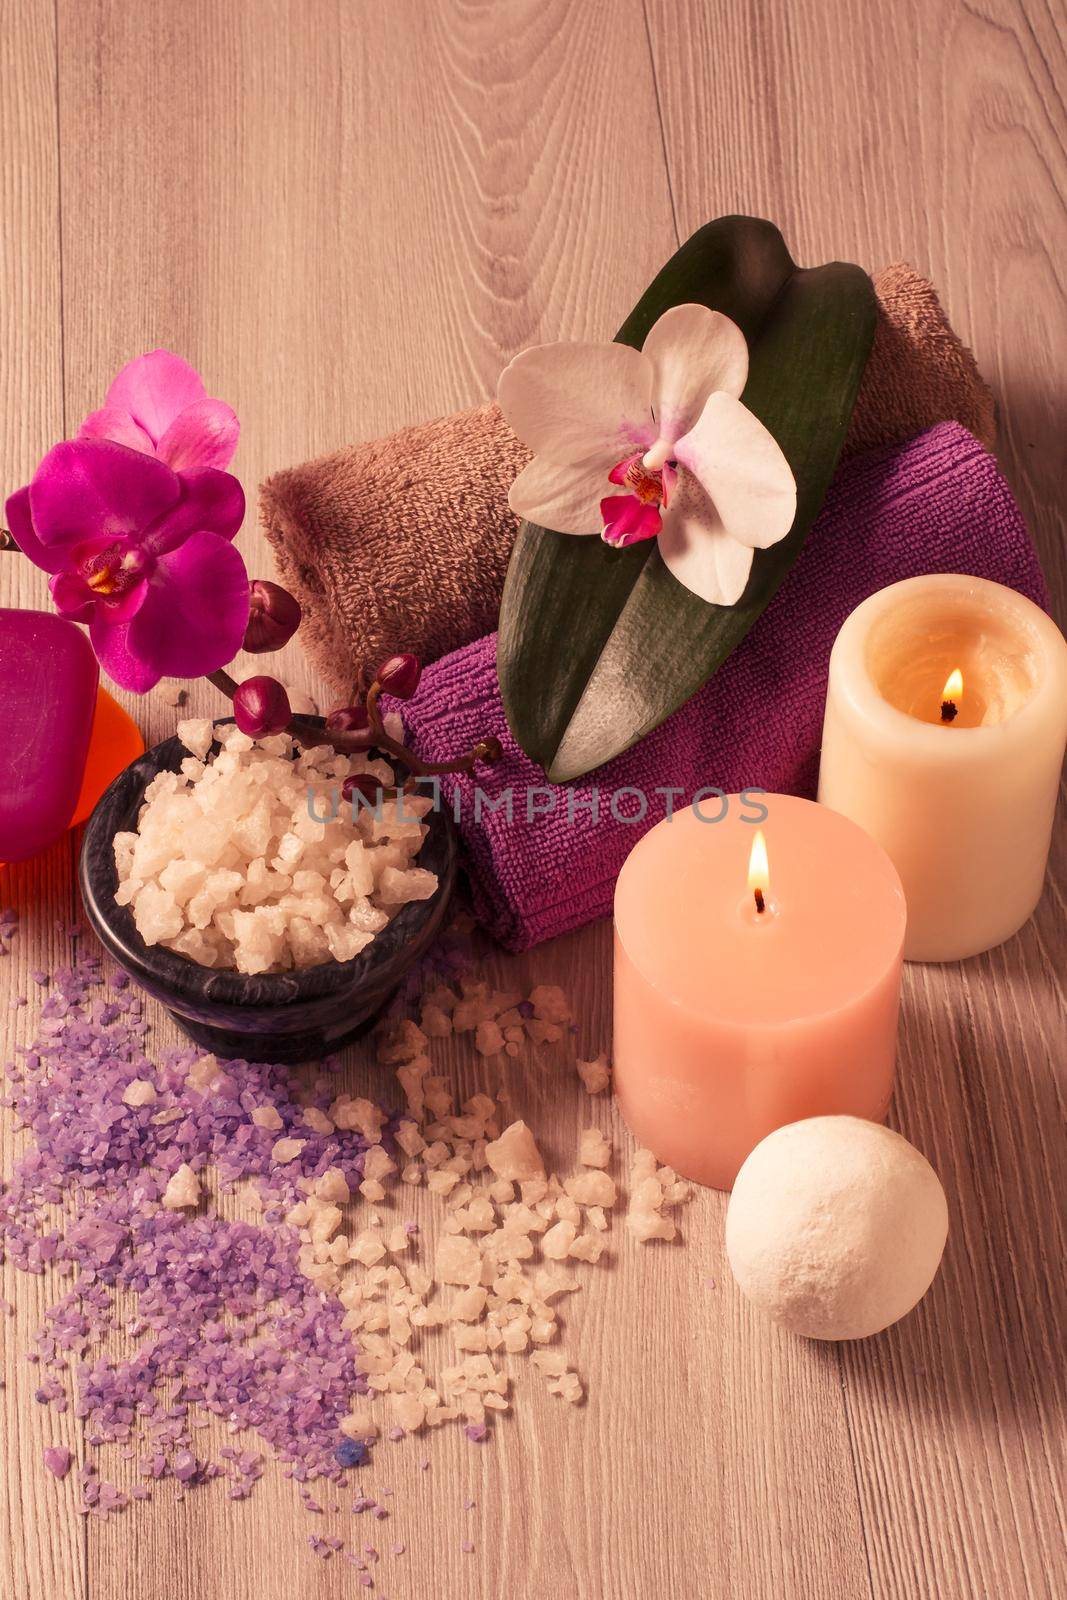 Spa setting with orchid flowers, bowl with sea salt, candles, soap and towels on wooden board